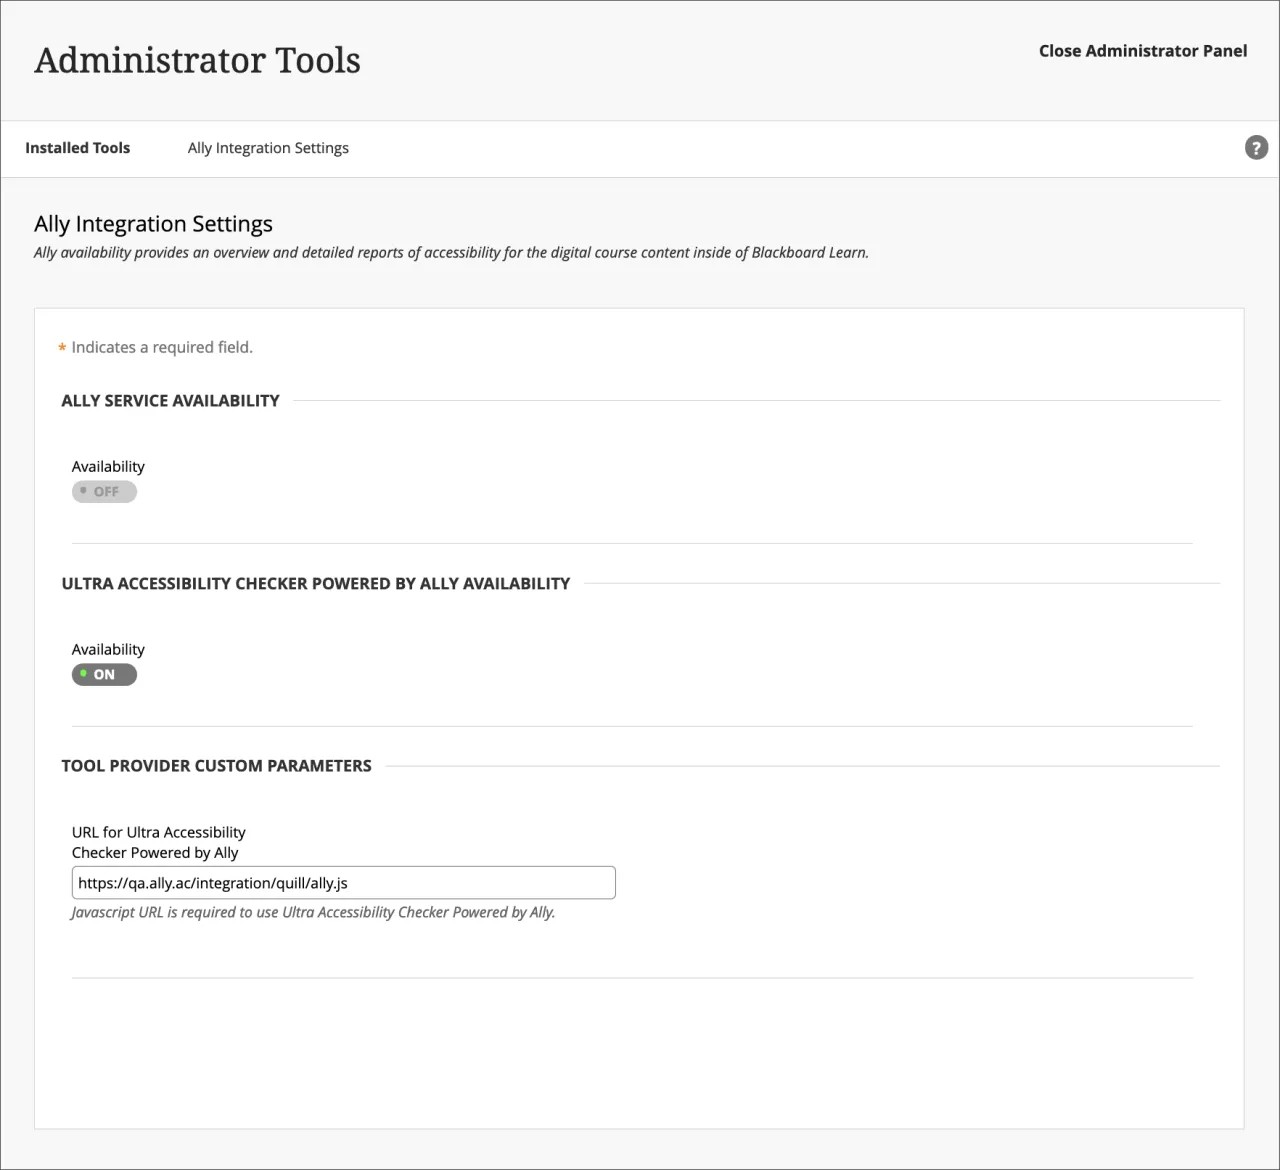 Administrator view – Ally Integration Settings